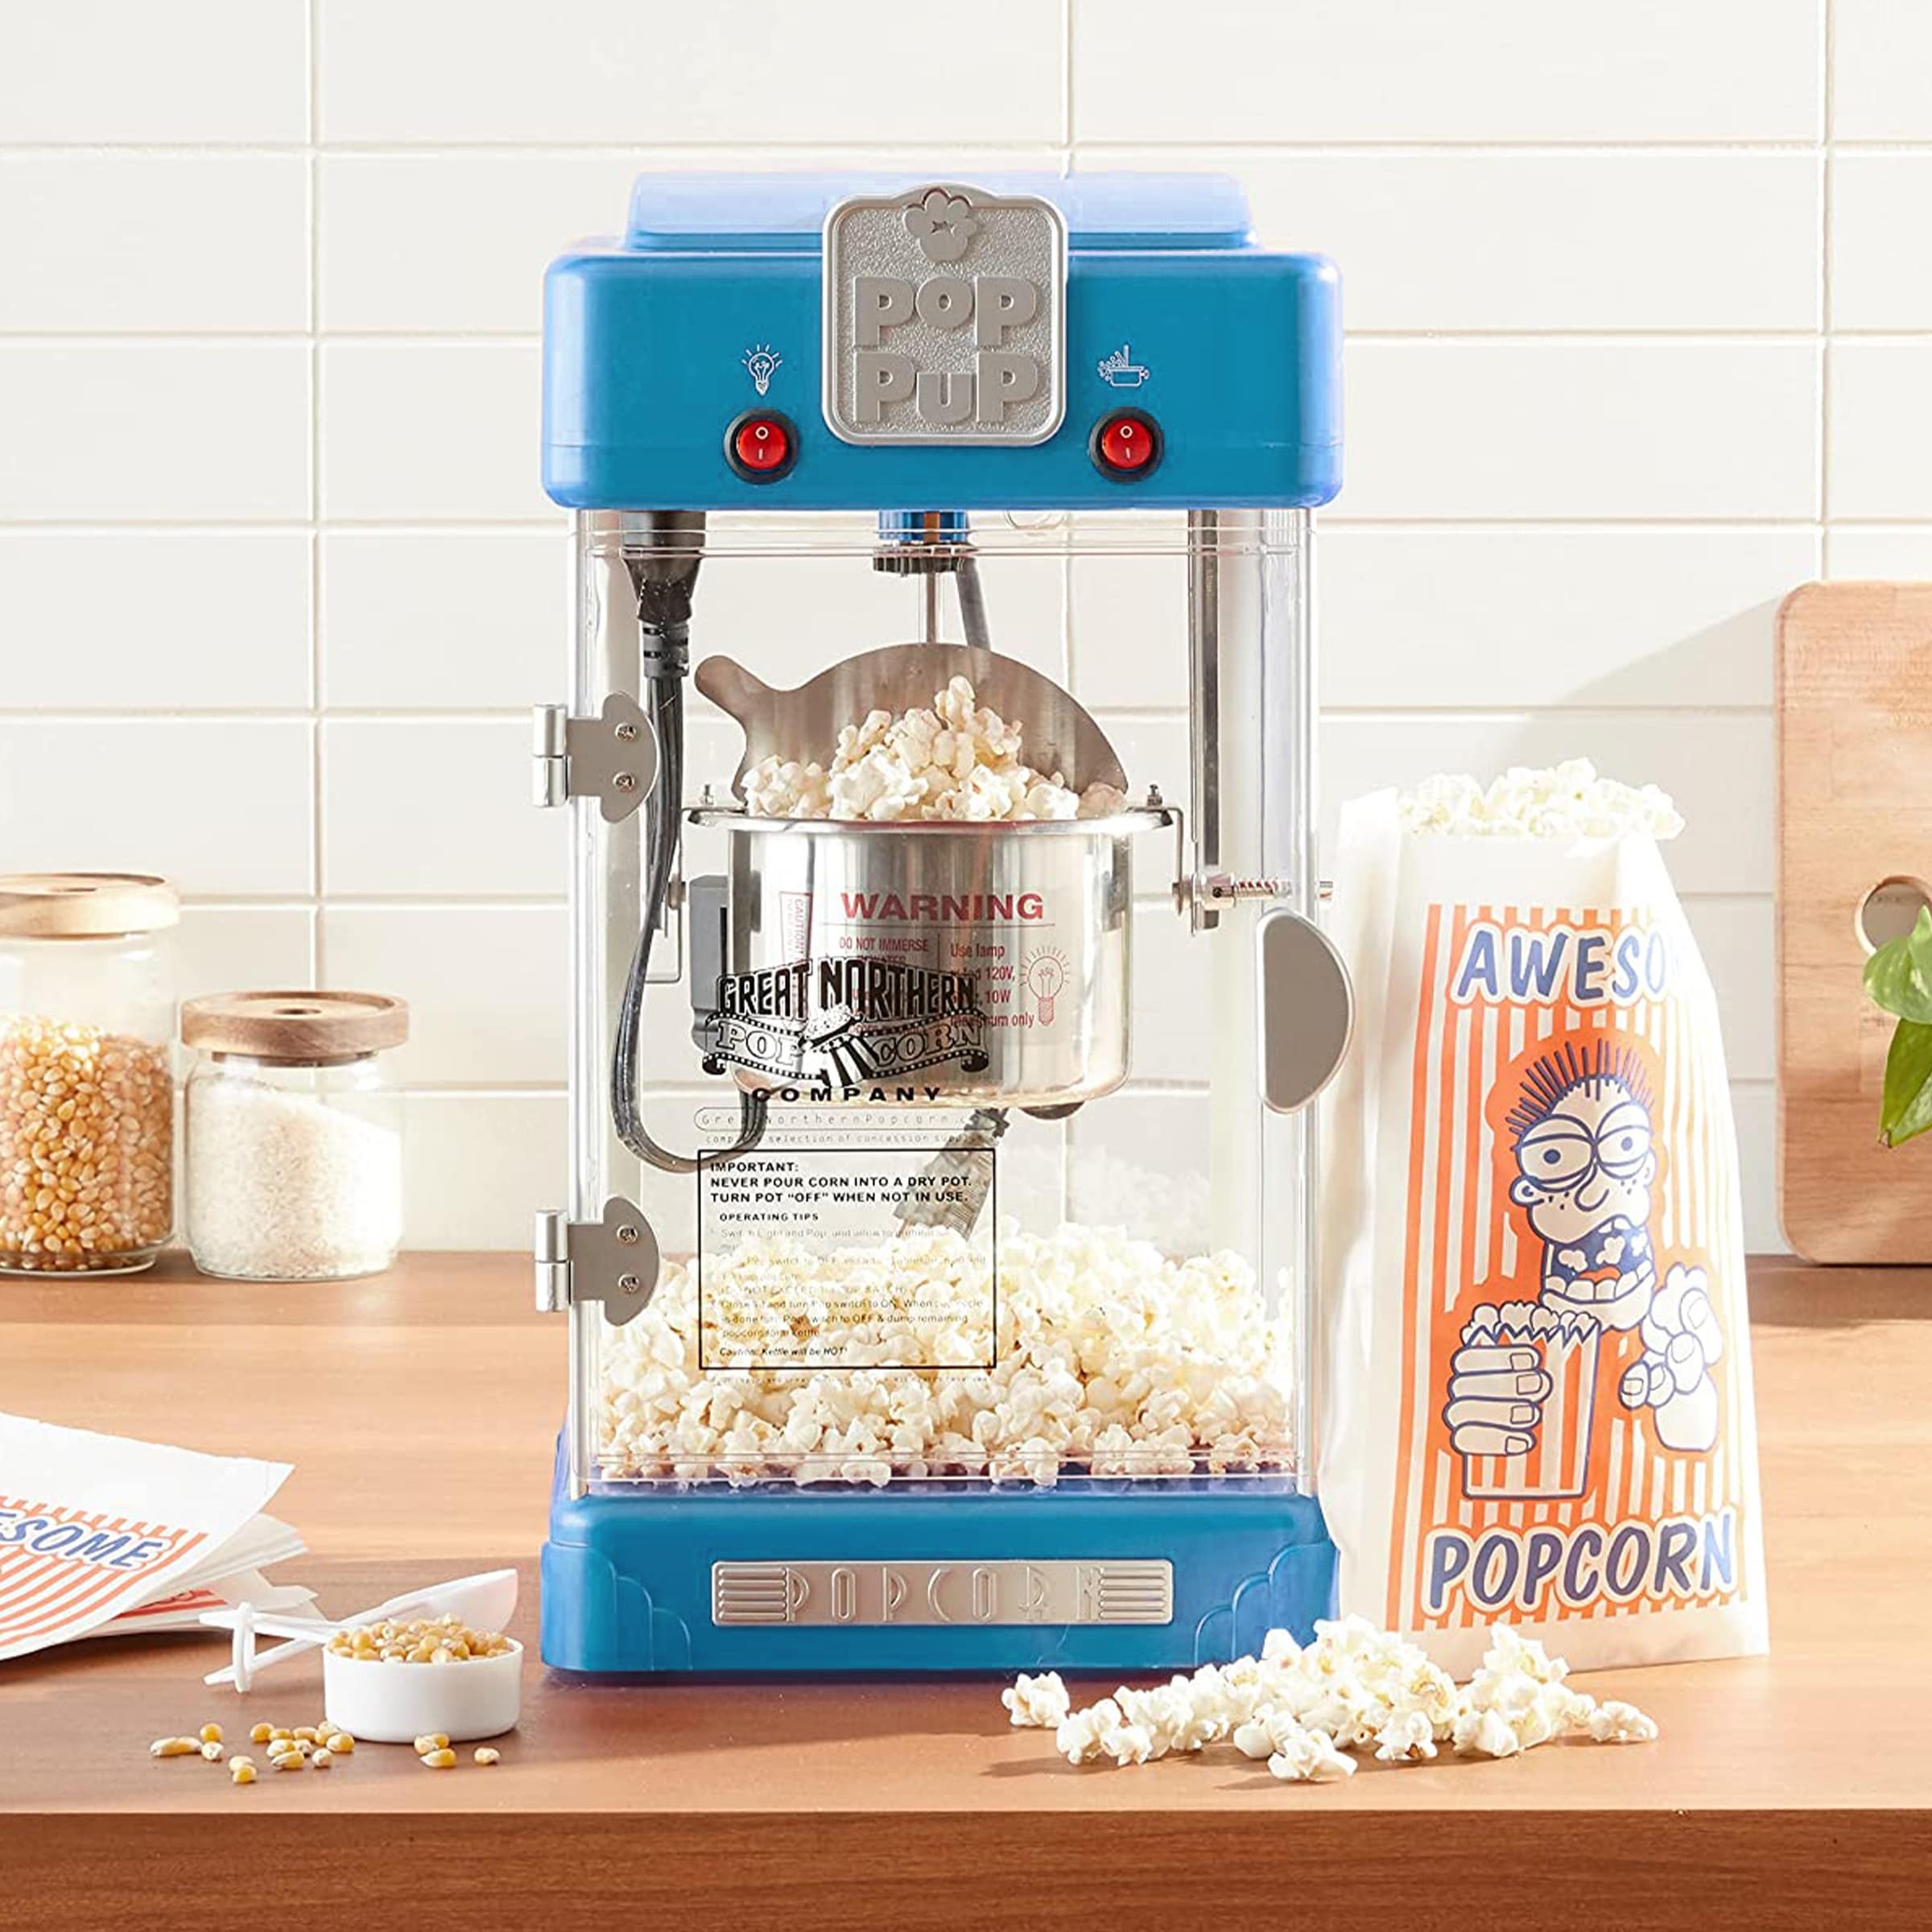 https://ak1.ostkcdn.com/images/products/is/images/direct/7d258ea26328298275478e63f72bef1cd98d93f5/Pop-Pup-Countertop-Popcorn-Machine-%E2%80%93-2.5oz-Kettle-with-Measuring-Spoon%2C-Scoop%2C-and-25-Serving-Bags-%28Blue%29.jpg